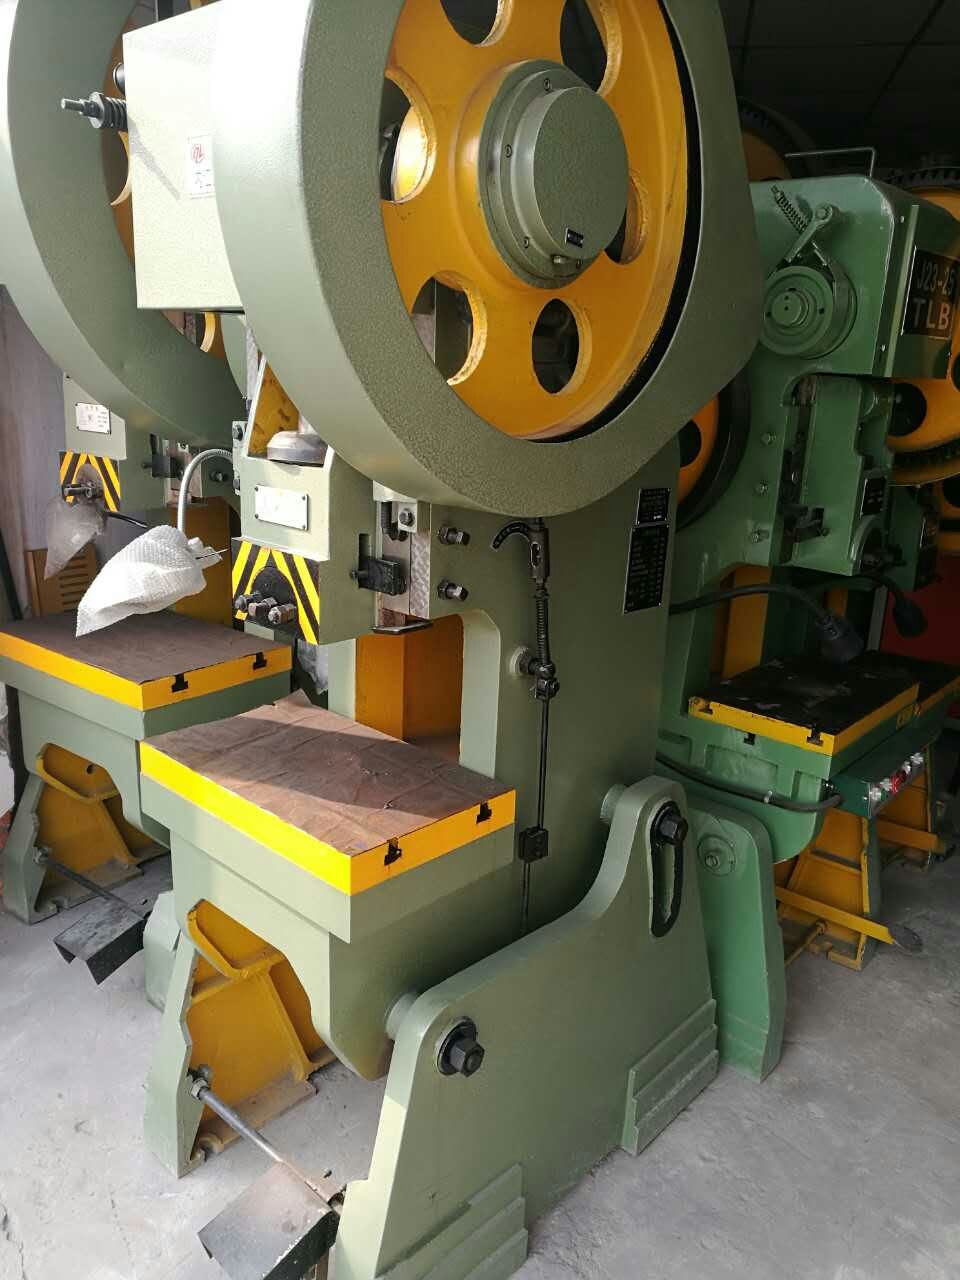 J21 open power press with fixed bed